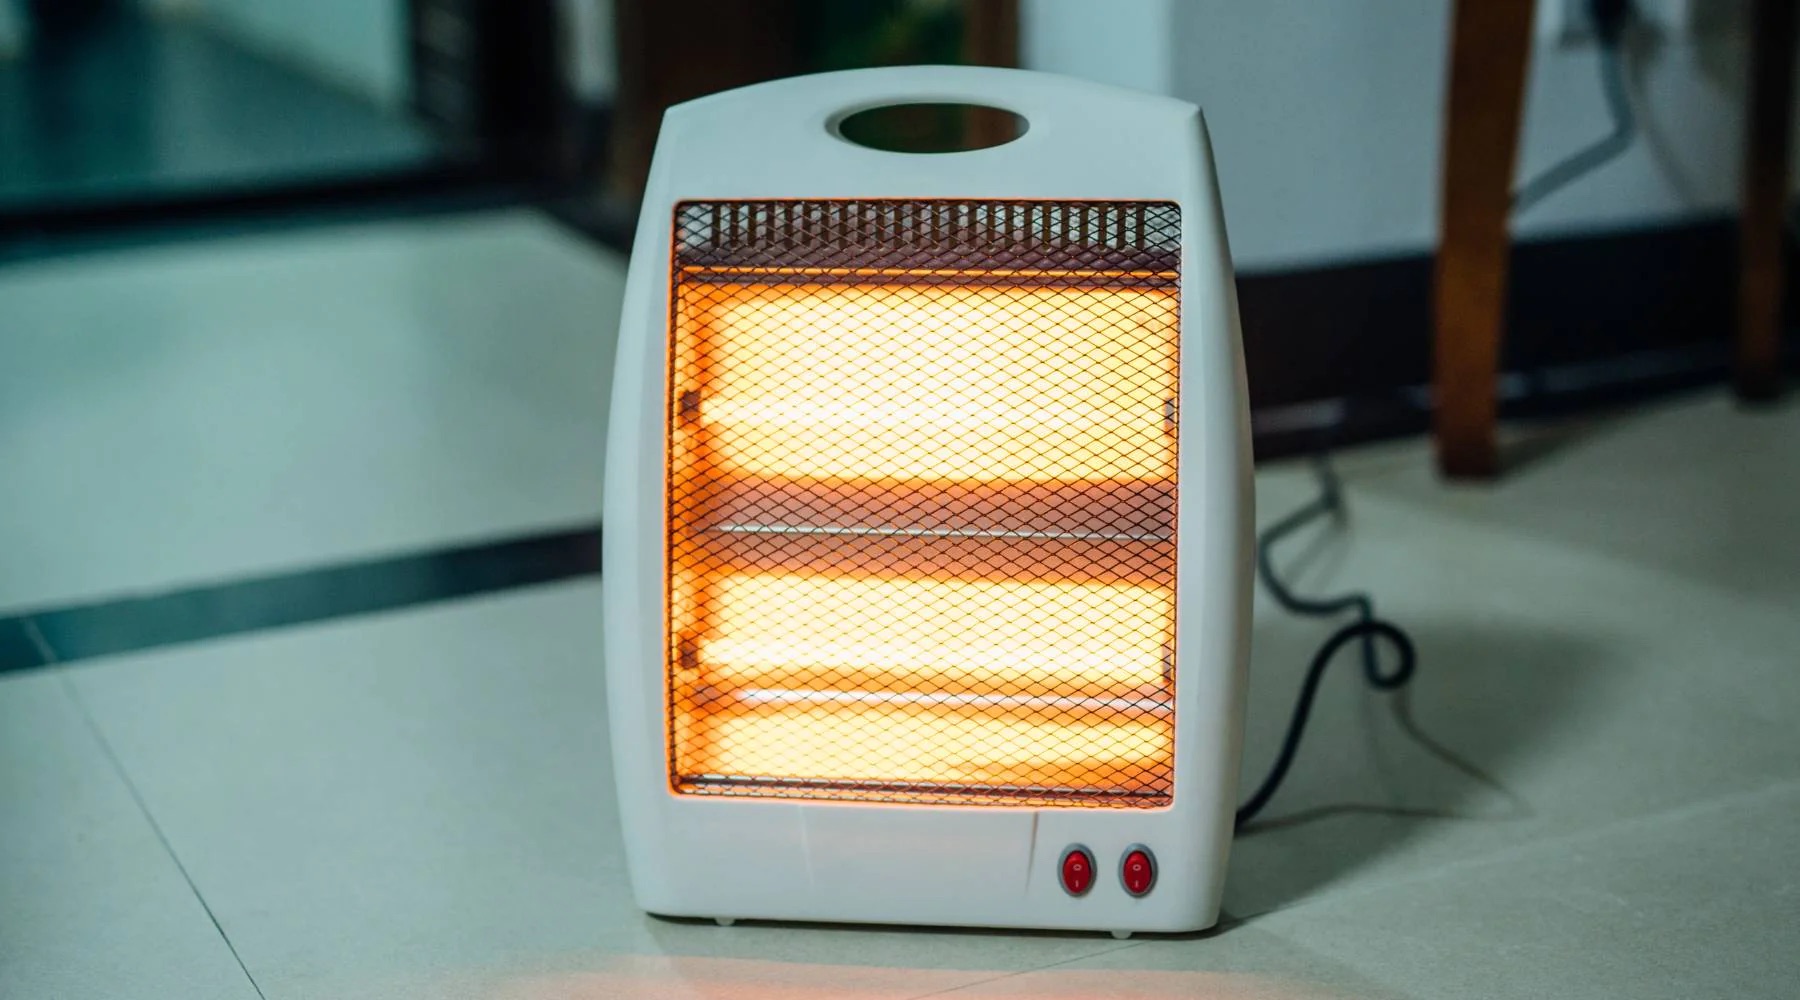 How Does A Space Heater Work?